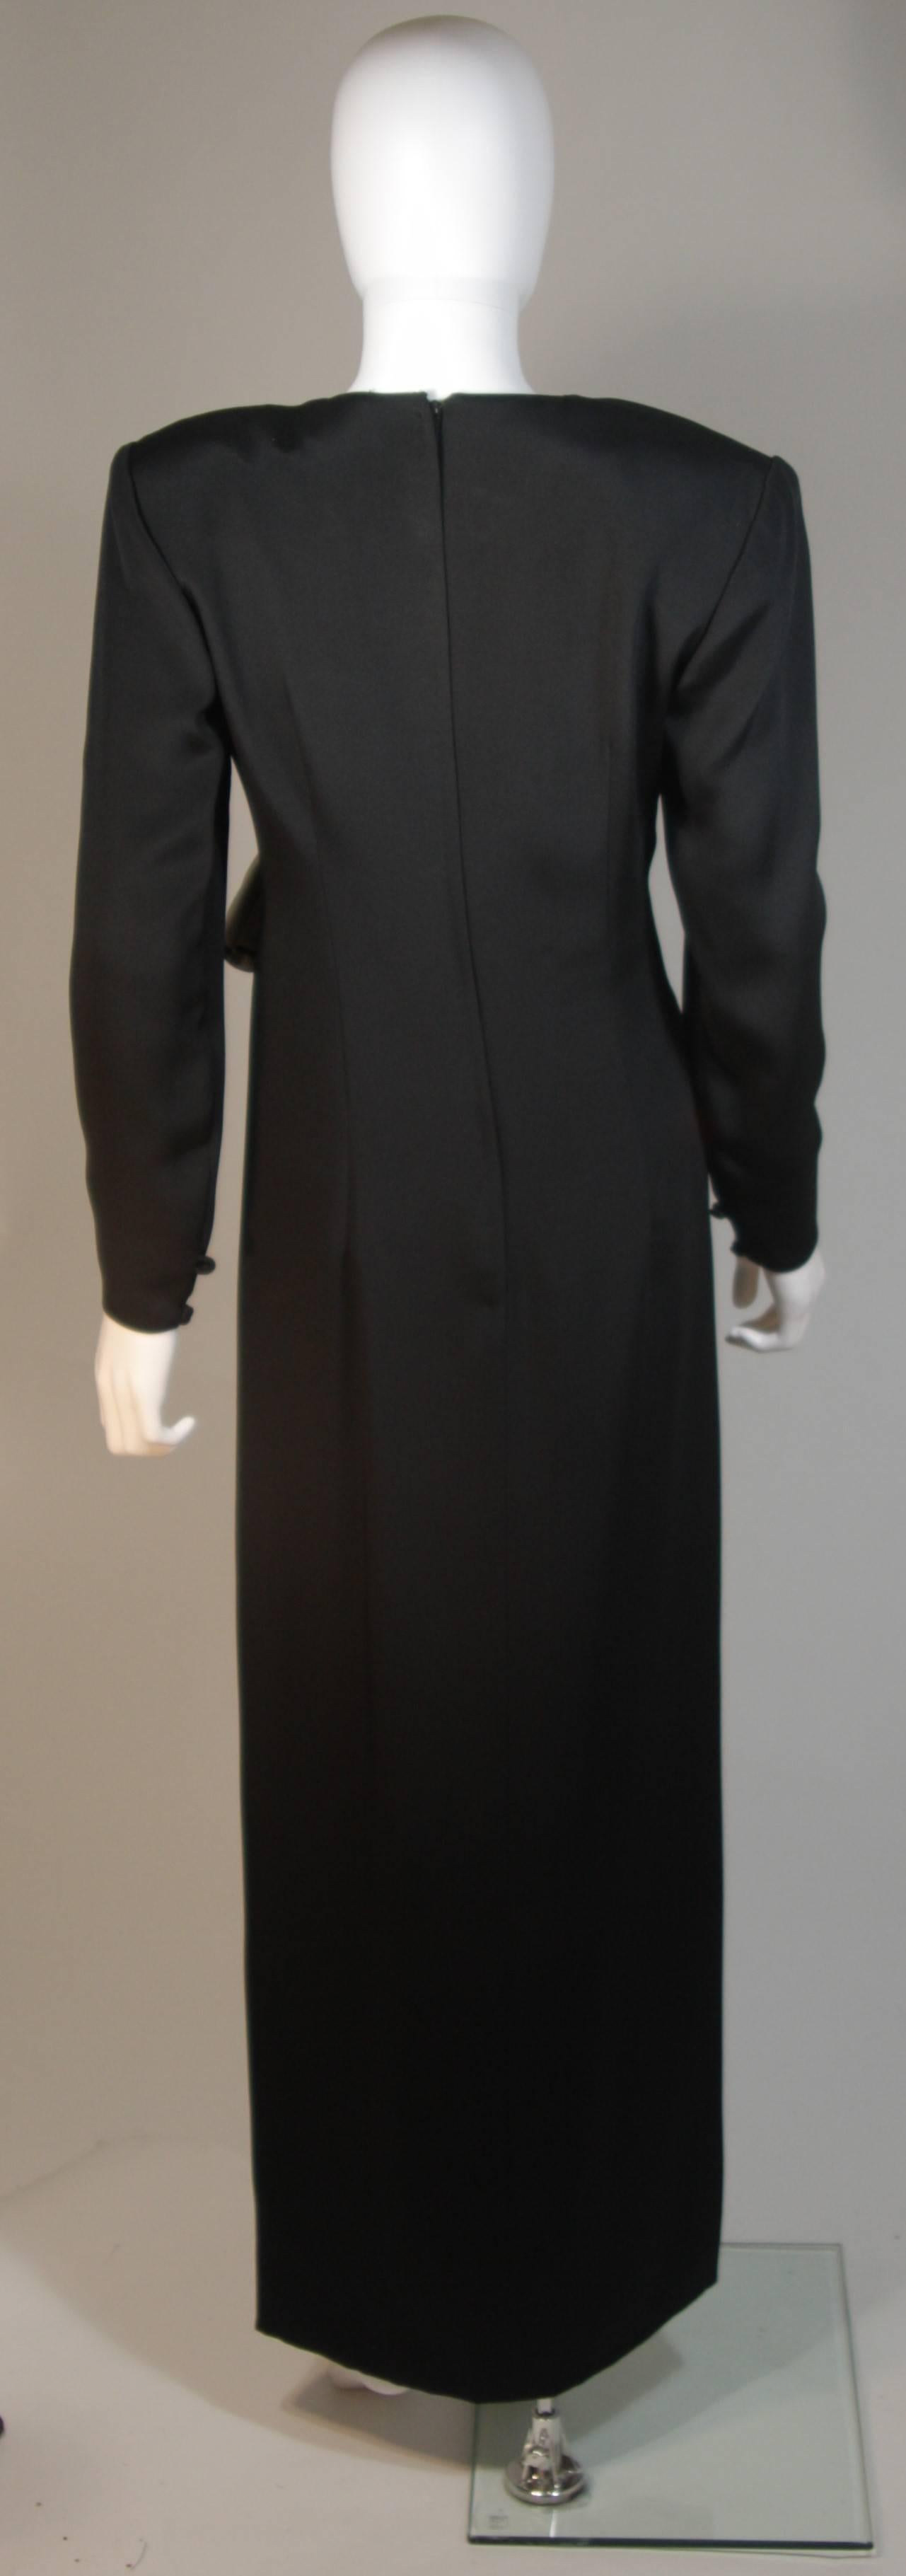 NOLAN MILLER Black and White Contrast Gown with Drape Detail Size 6 For Sale 2